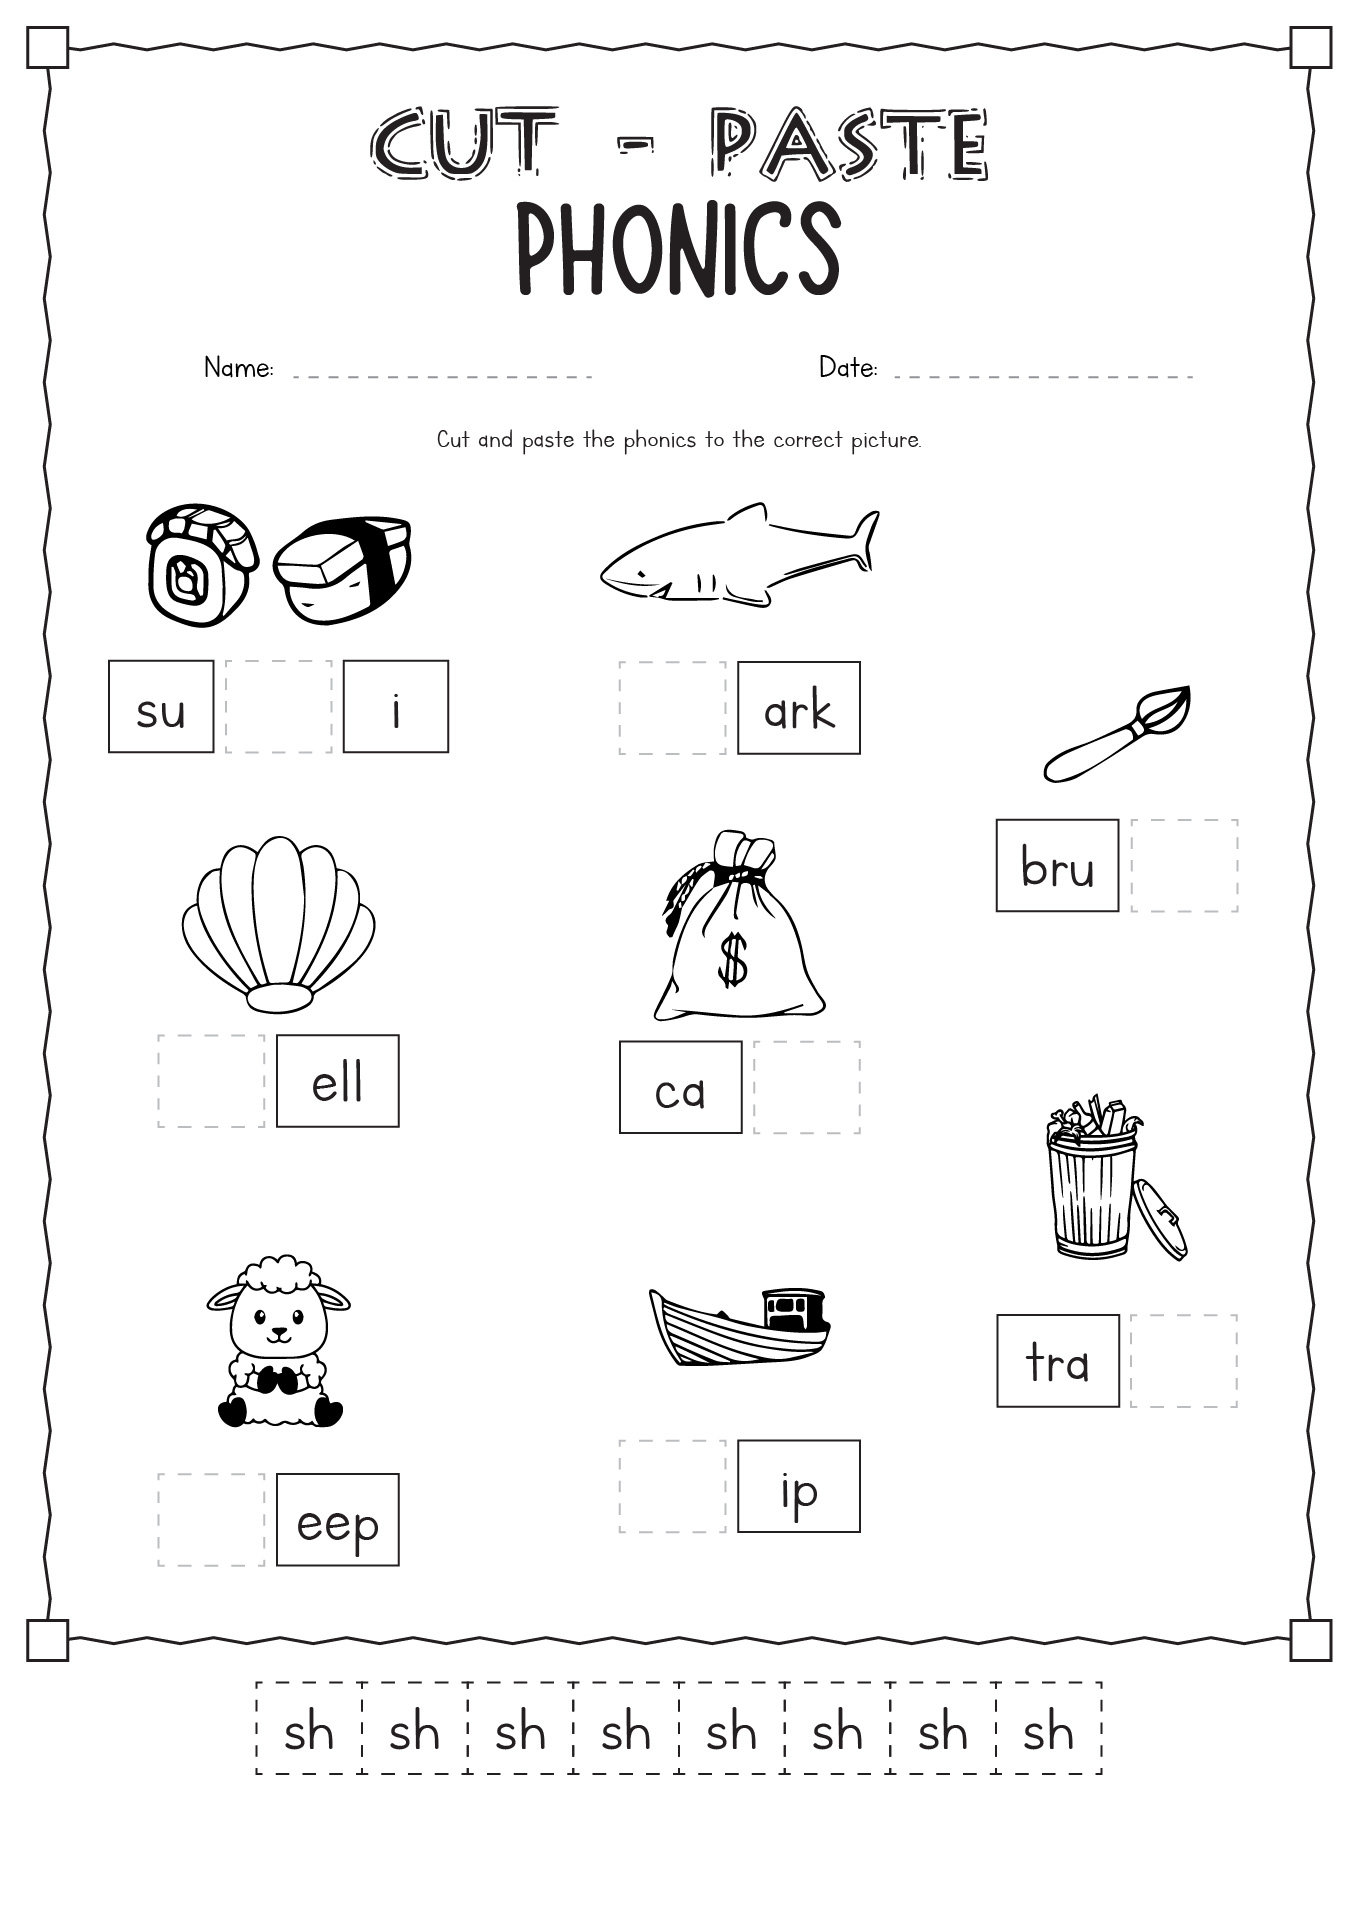 Cut and Paste Phonics Worksheets